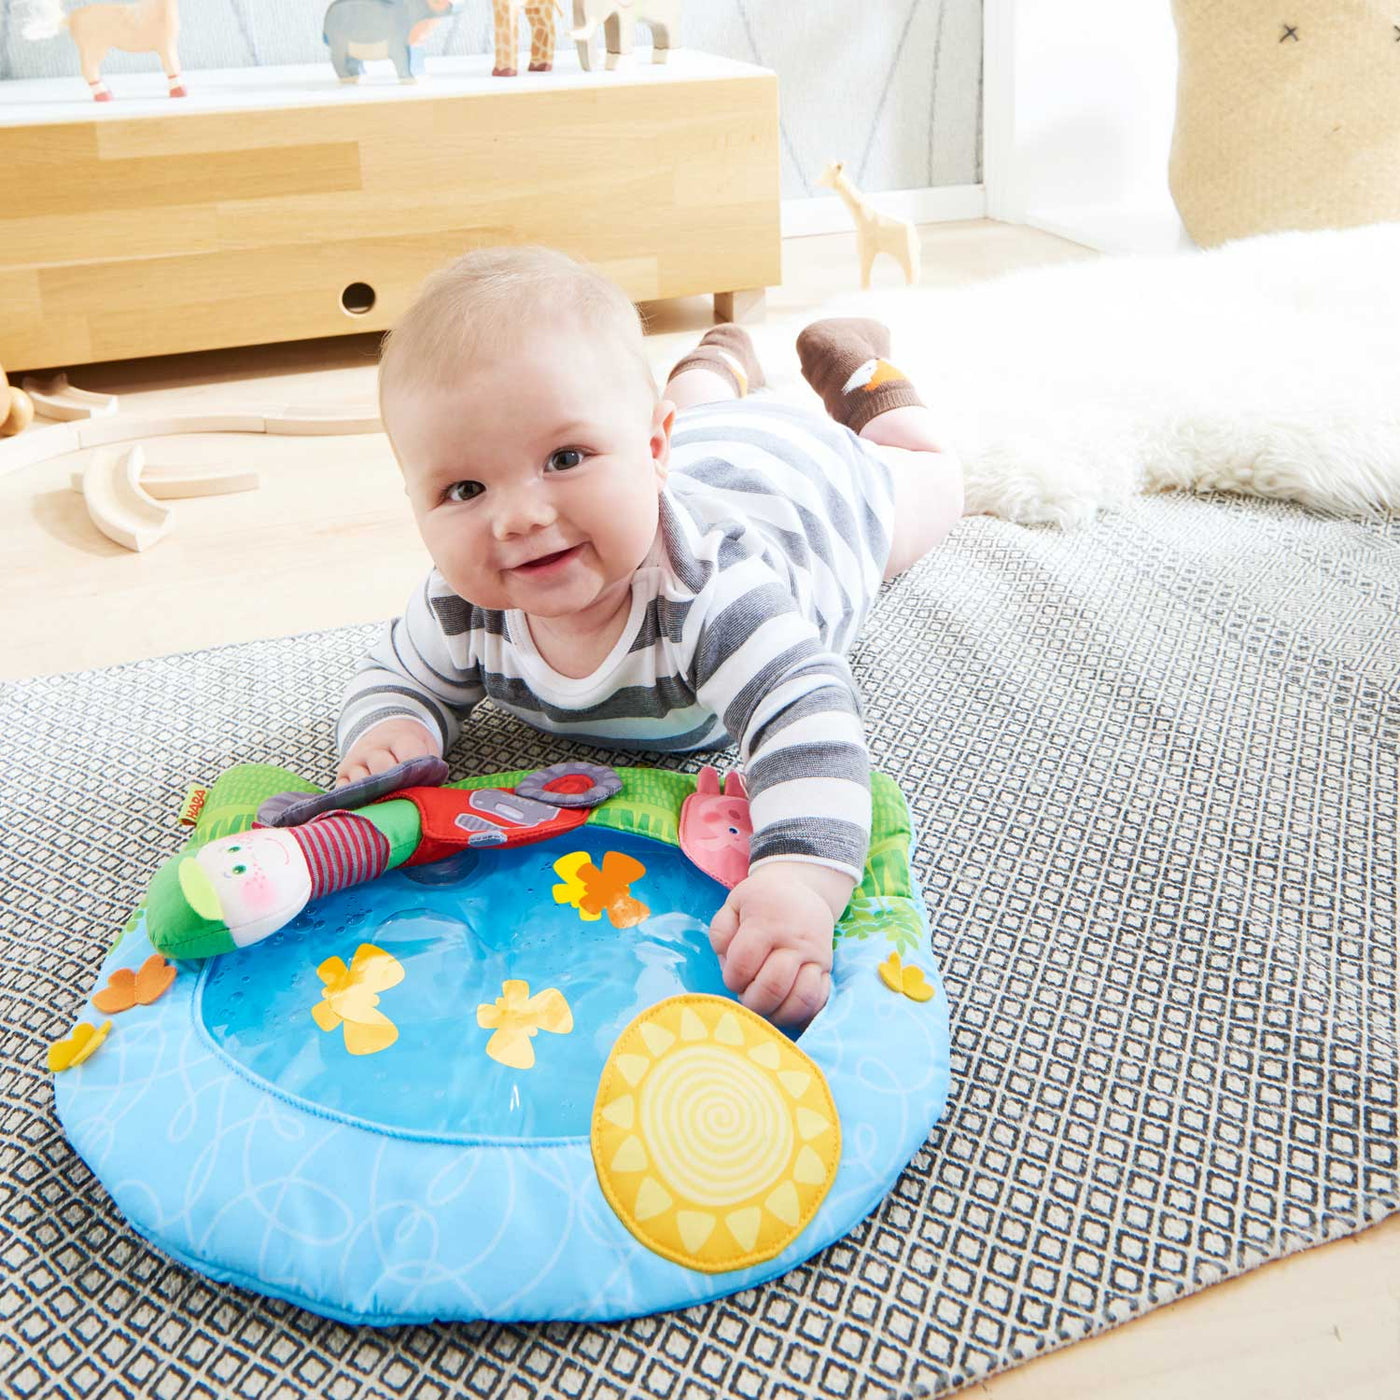 On the Farm Water Play Mat Tummy Time Activity - HABA USA